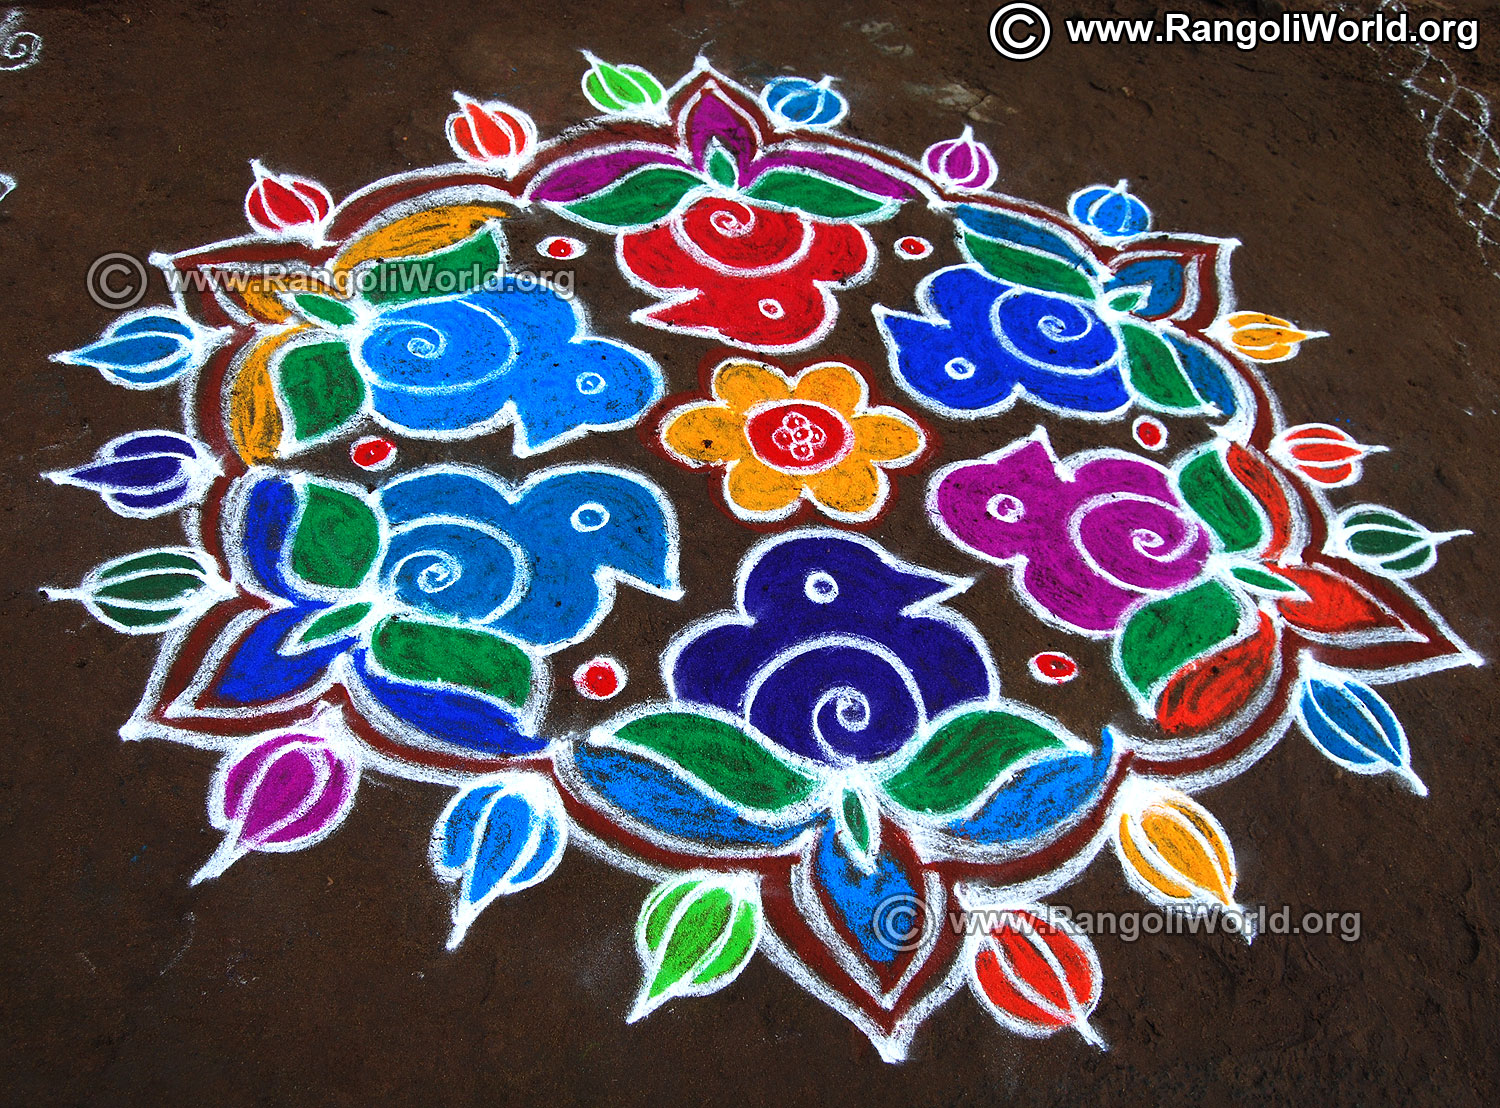 An Incredible Collection of Full 4K Kolam Designs and Rangoli Images for 2019: Over 999 Stunning Options